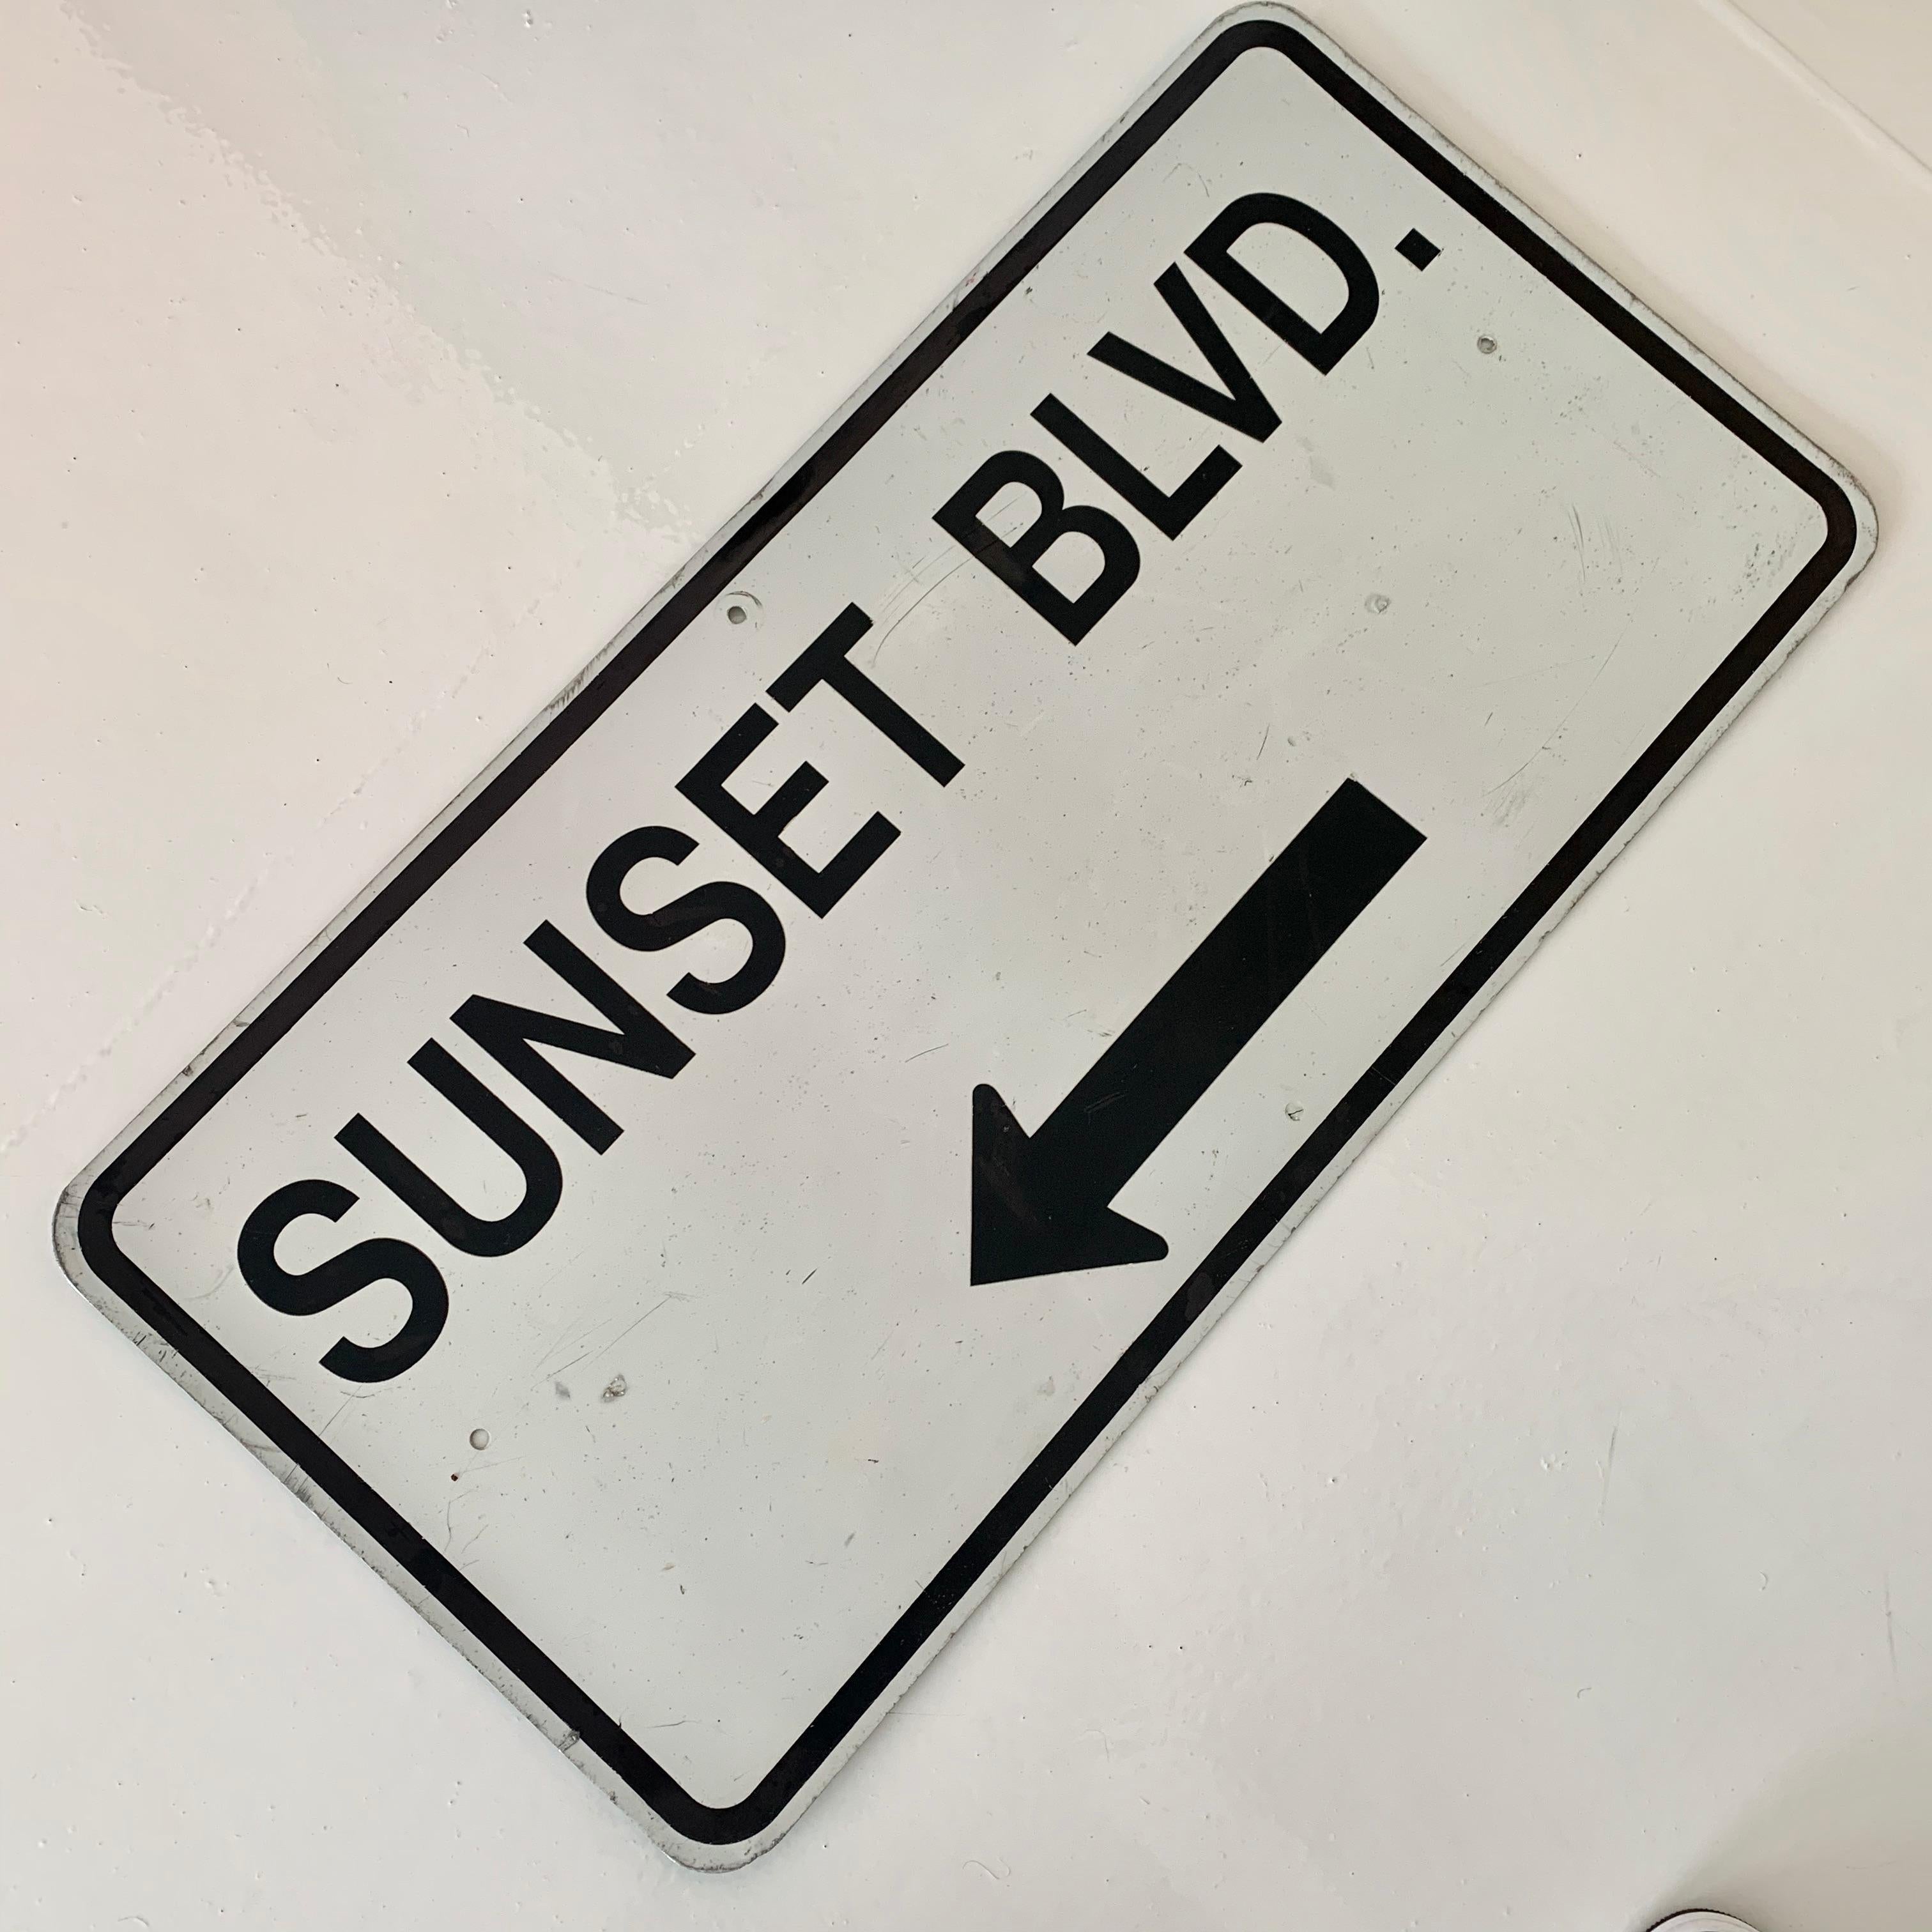 Cool street sign from Sunset Blvd in Los Angeles. White sign with black lettering, circa 1980s. Measures: 3 feet long by 18 inches tall. Fun piece of Los Angeles/California transportation ephemera.
  